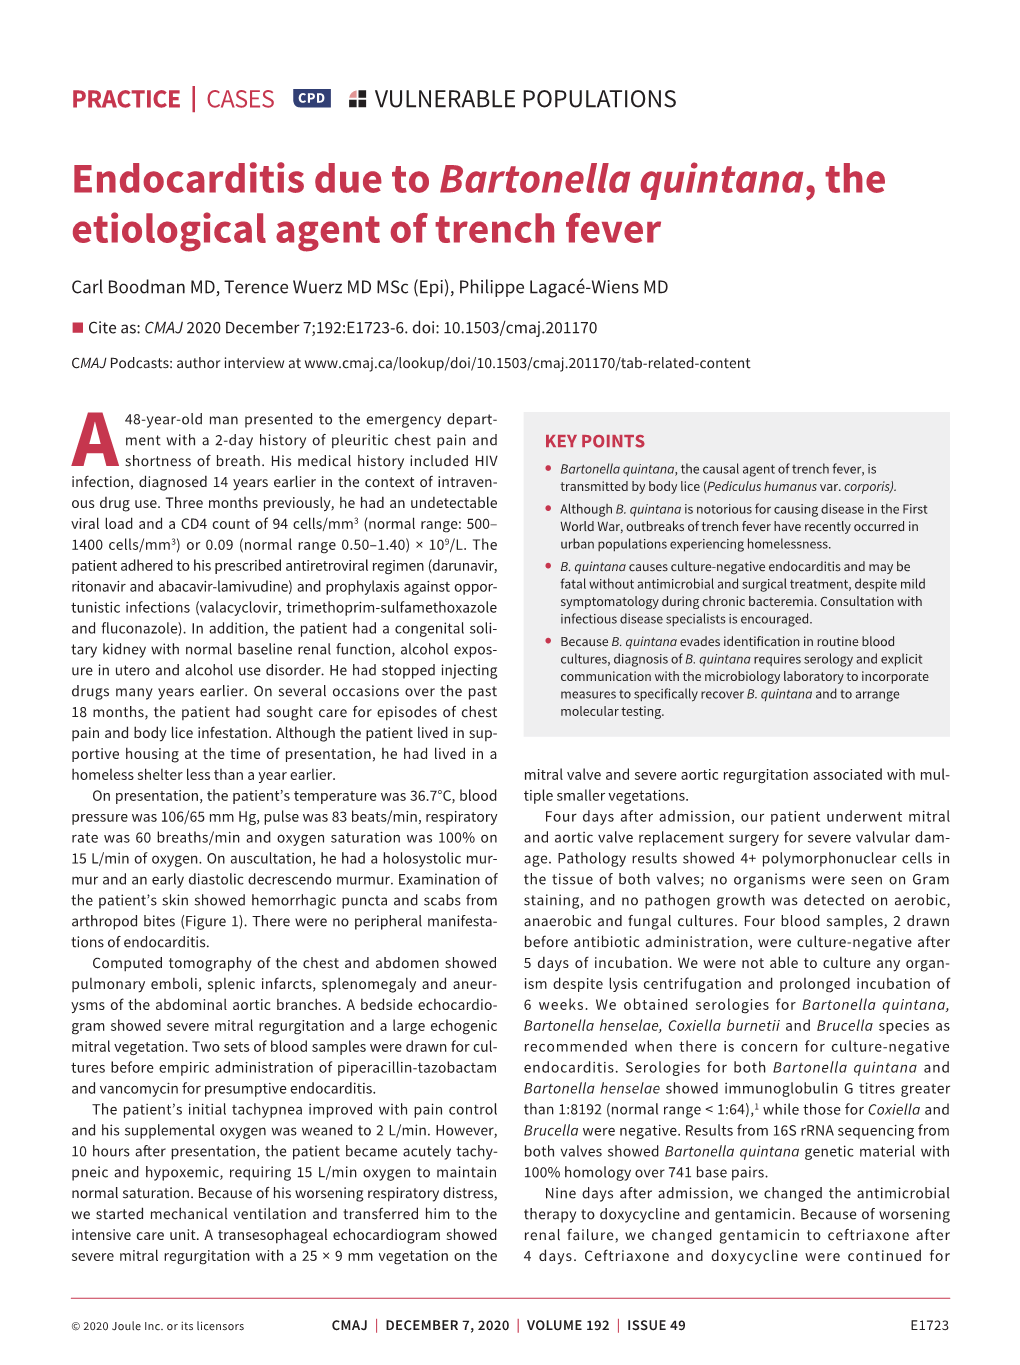 Endocarditis Due to Bartonella Quintana, the Etiological Agent of Trench Fever